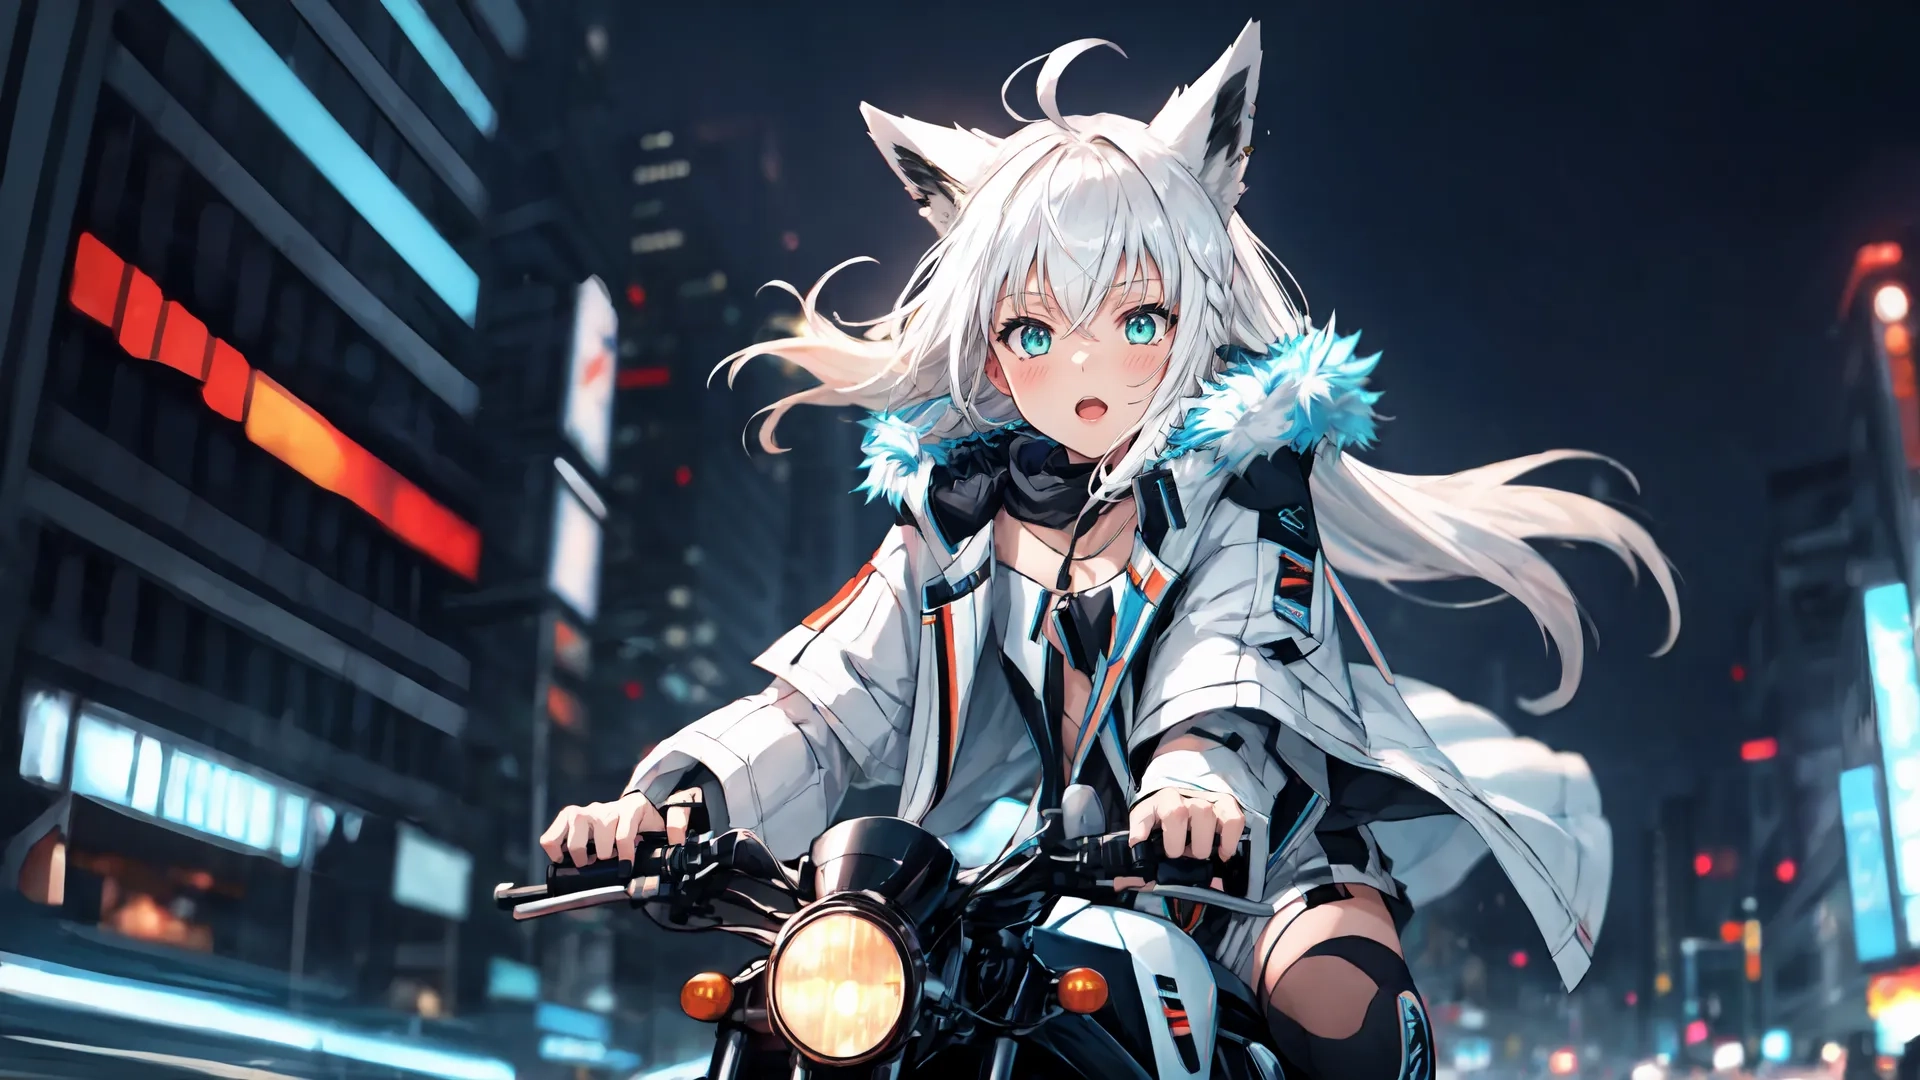 anime girl on motorcycle riding through city street at night with city lights and building buildings across river bank, with light trails coming down the sky to the left
